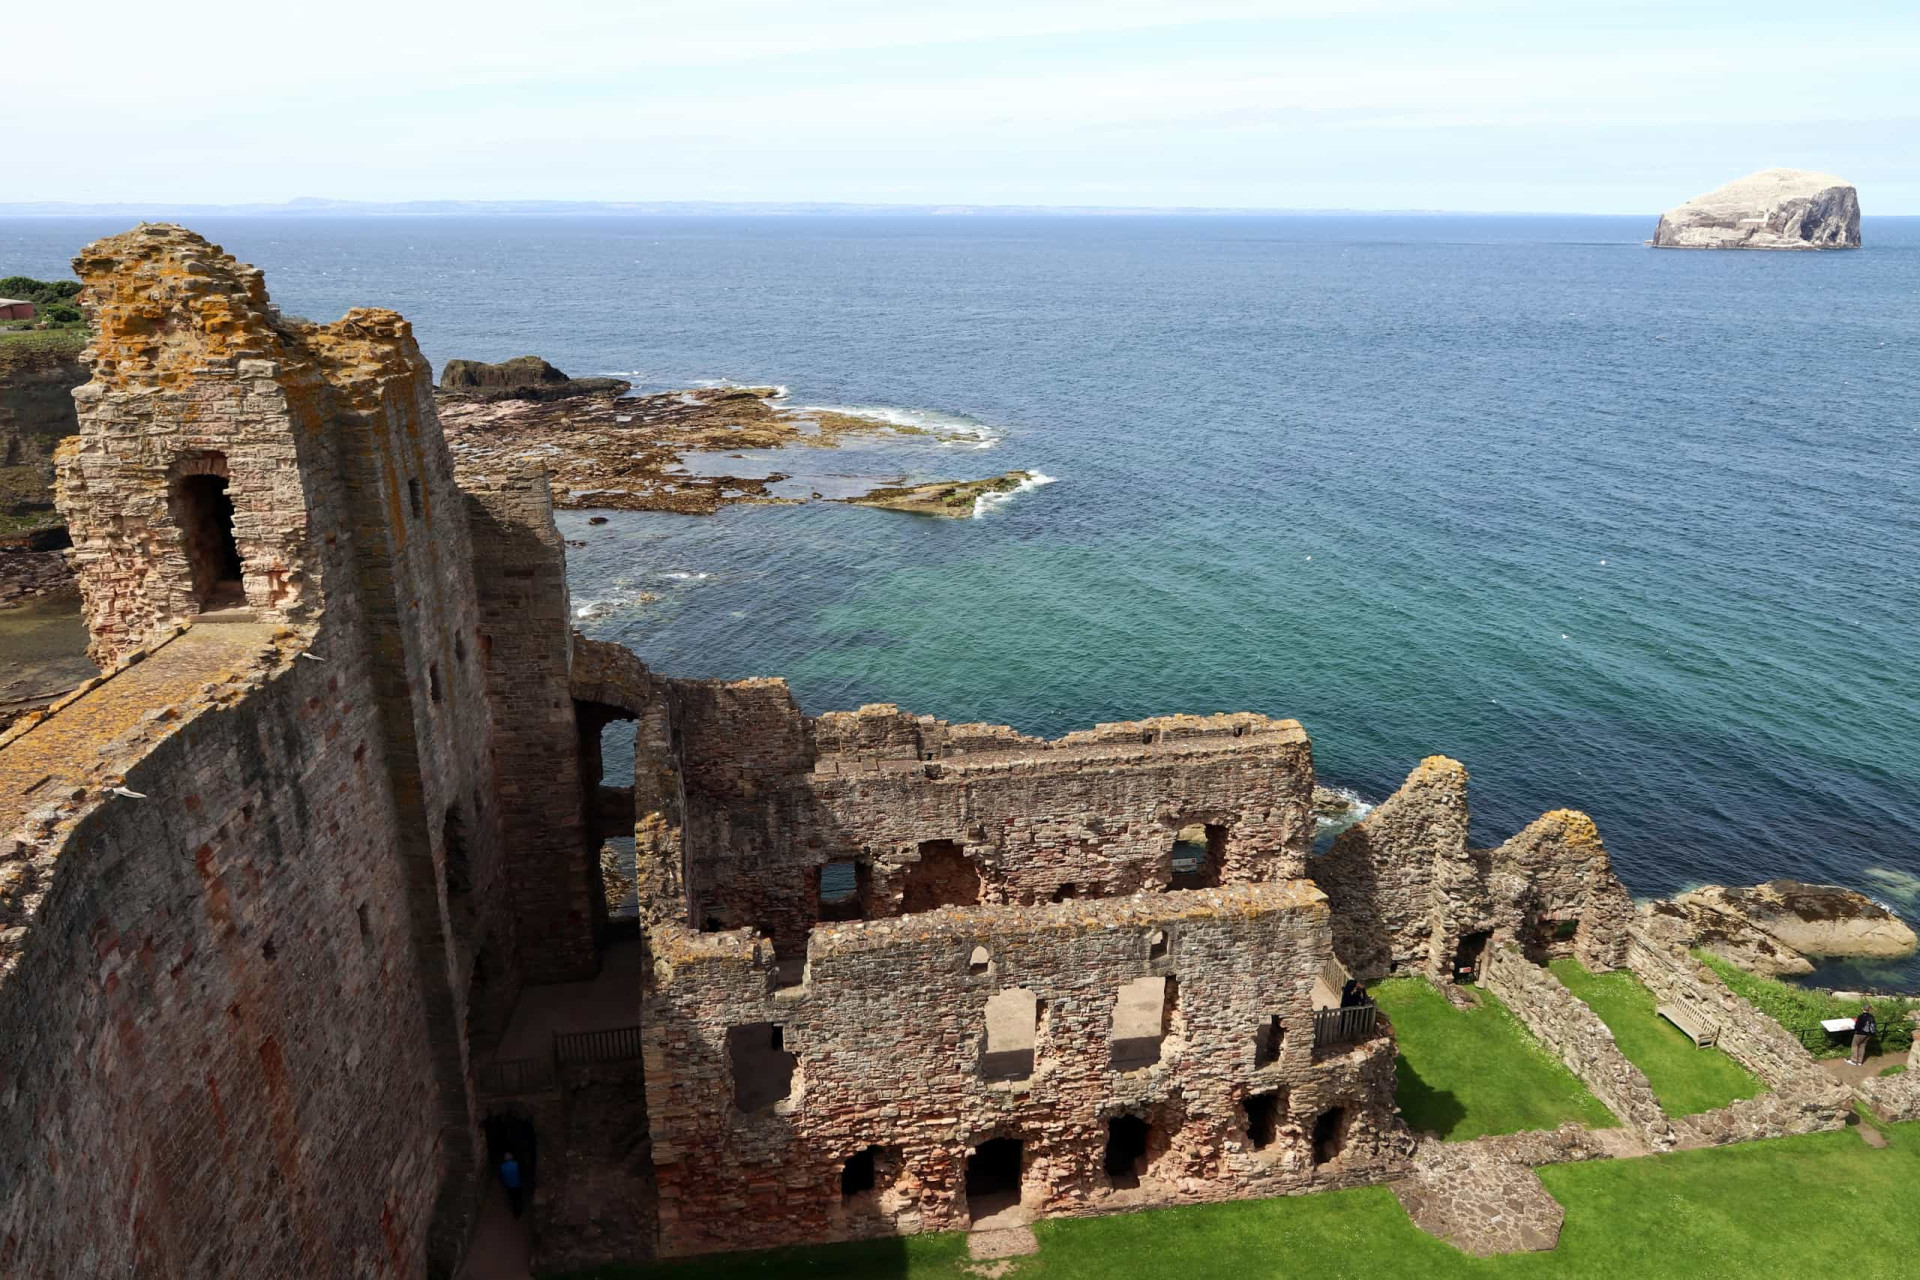 <p>A ruin since the 17th century, Tantallon Castle in East Lothian has had living residents for hundreds of years. But there is one unearthly man who apparently still calls it home.</p><p>You may also like:<a href="https://www.starsinsider.com/n/344840?utm_source=msn.com&utm_medium=display&utm_campaign=referral_description&utm_content=479726v1en-ca"> These celebrities are often mistaken for each other</a></p>